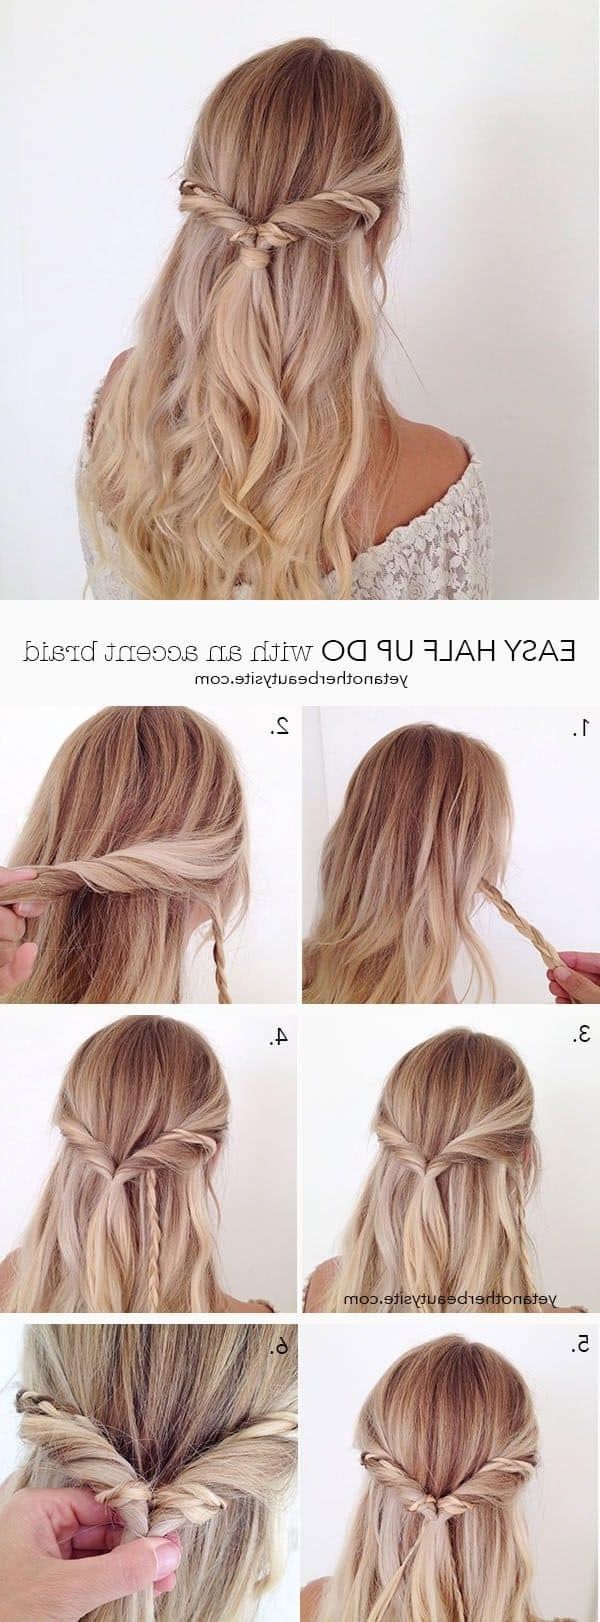 Simple Wedding Hairstyles Best Photos – Page 3 Of 4 – Cute Wedding Ideas Intended For Preferred Simple Wedding Hairstyles (View 13 of 15)